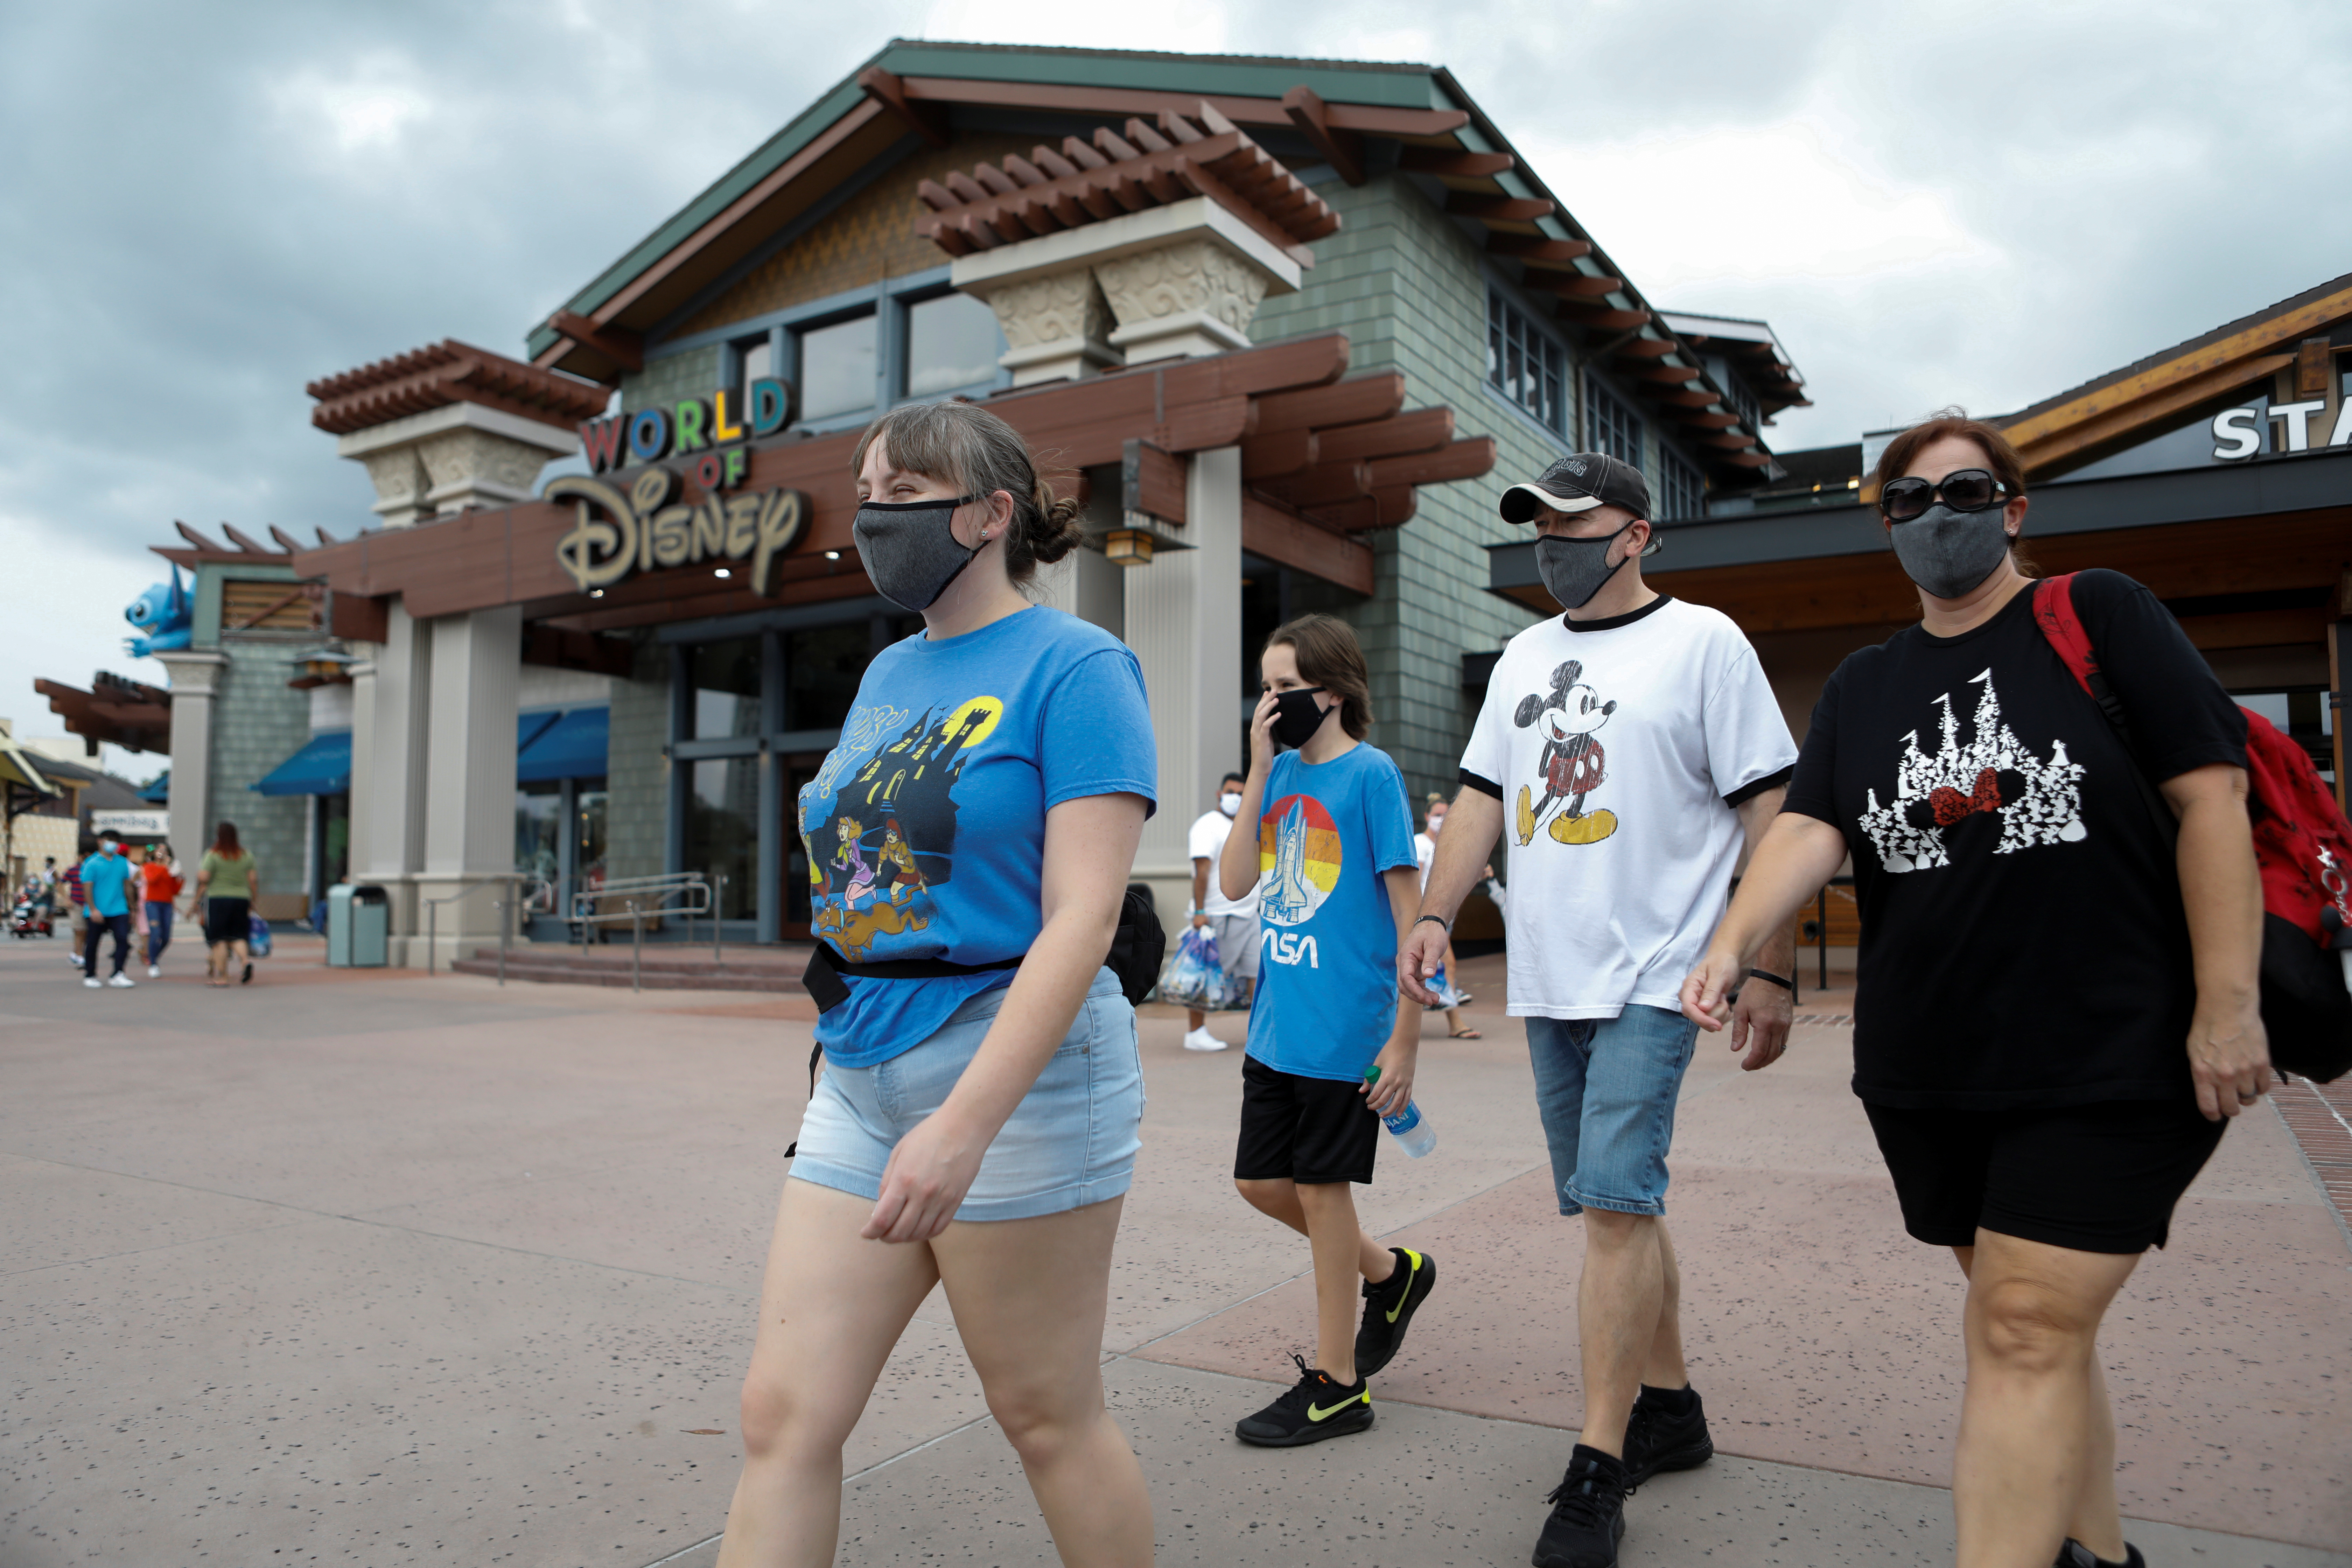 Summer Selmon, her brother Levi, and their parents Dave and Brandi wear face masks while visiting the Disney Springs shopping and dining district during their vacation at Walt Disney World during a phased reopening from coronavirus disease (COVID-19) restrictions in Lake Buena Vista, Florida, U.S. July 11, 2020. REUTERS/Octavio Jones